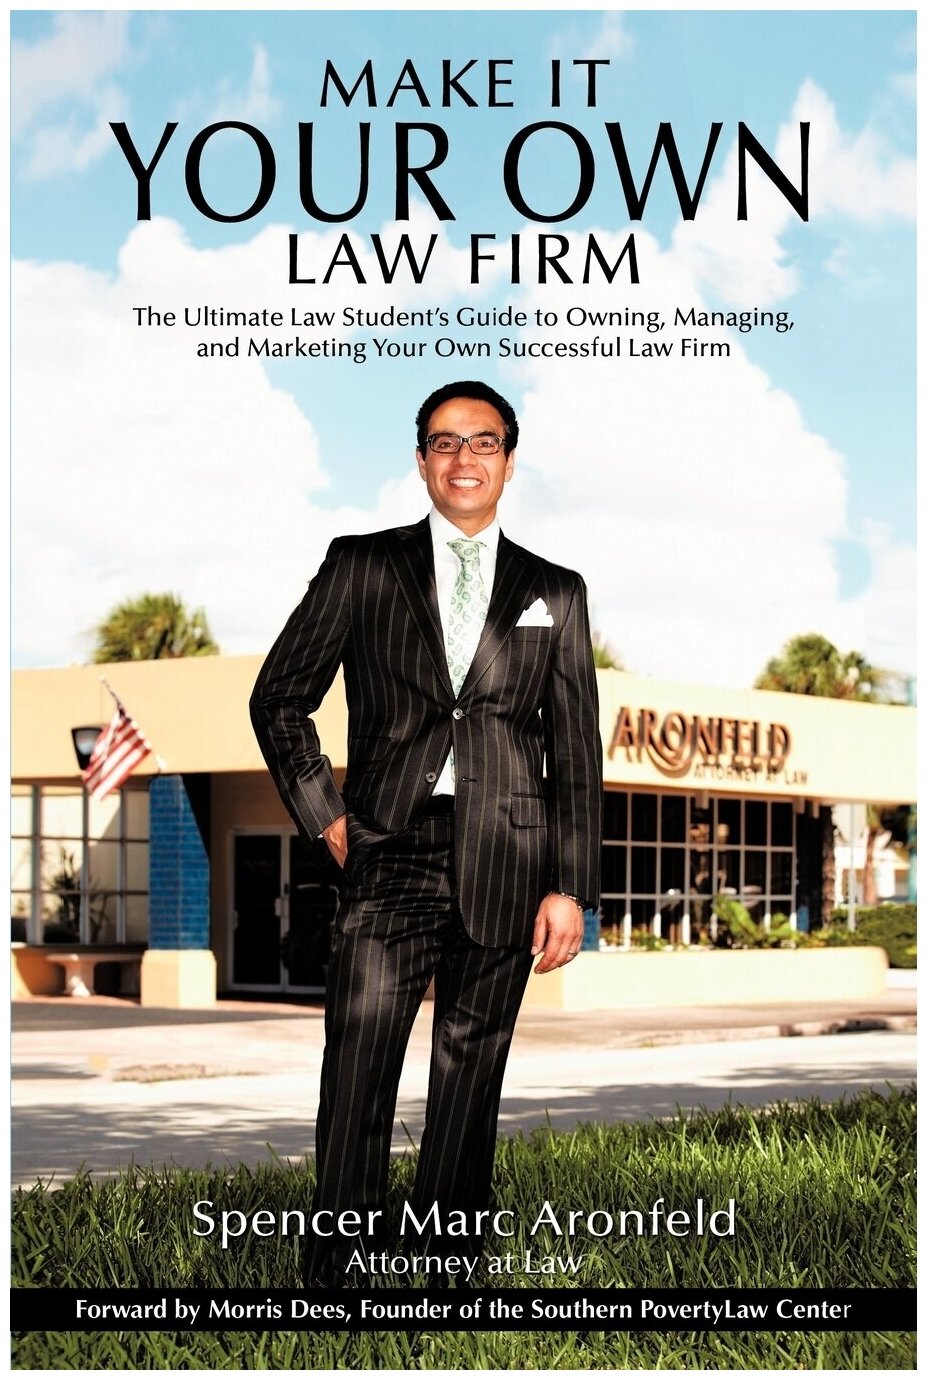 Make It Your Own Law Firm. The Ultimate Law Student's Guide to Owning, Managing, and Marketing Your Own Successful Law Firm